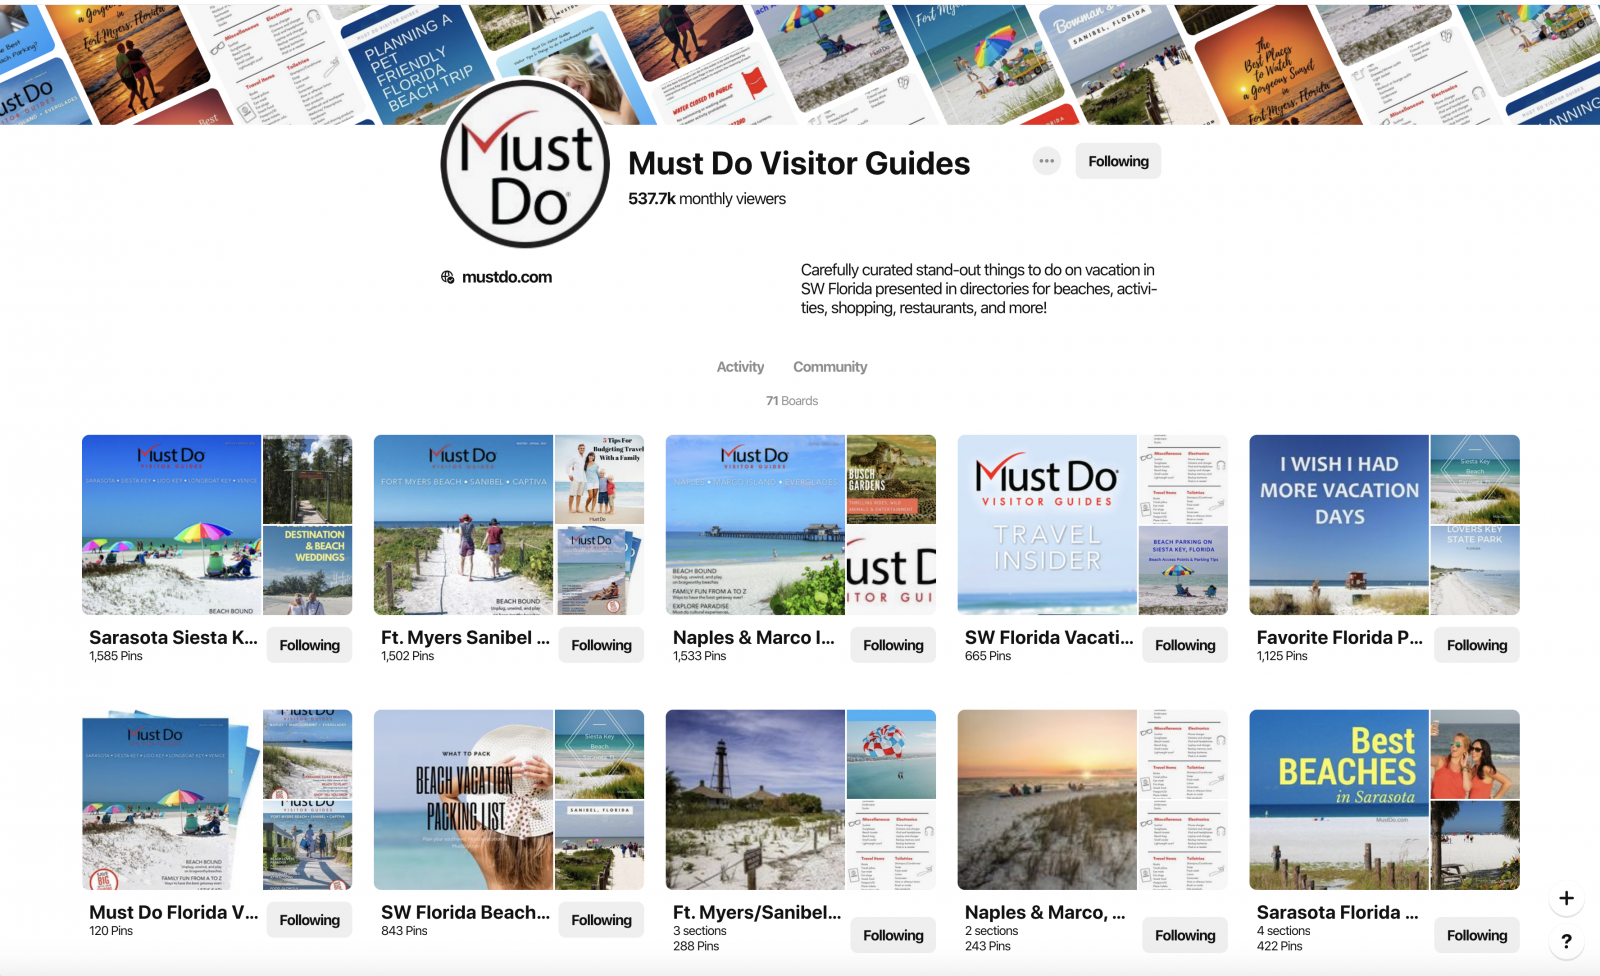 Must Do Visitor Guides Pinterest boards for planning a vacation to SW Florida.